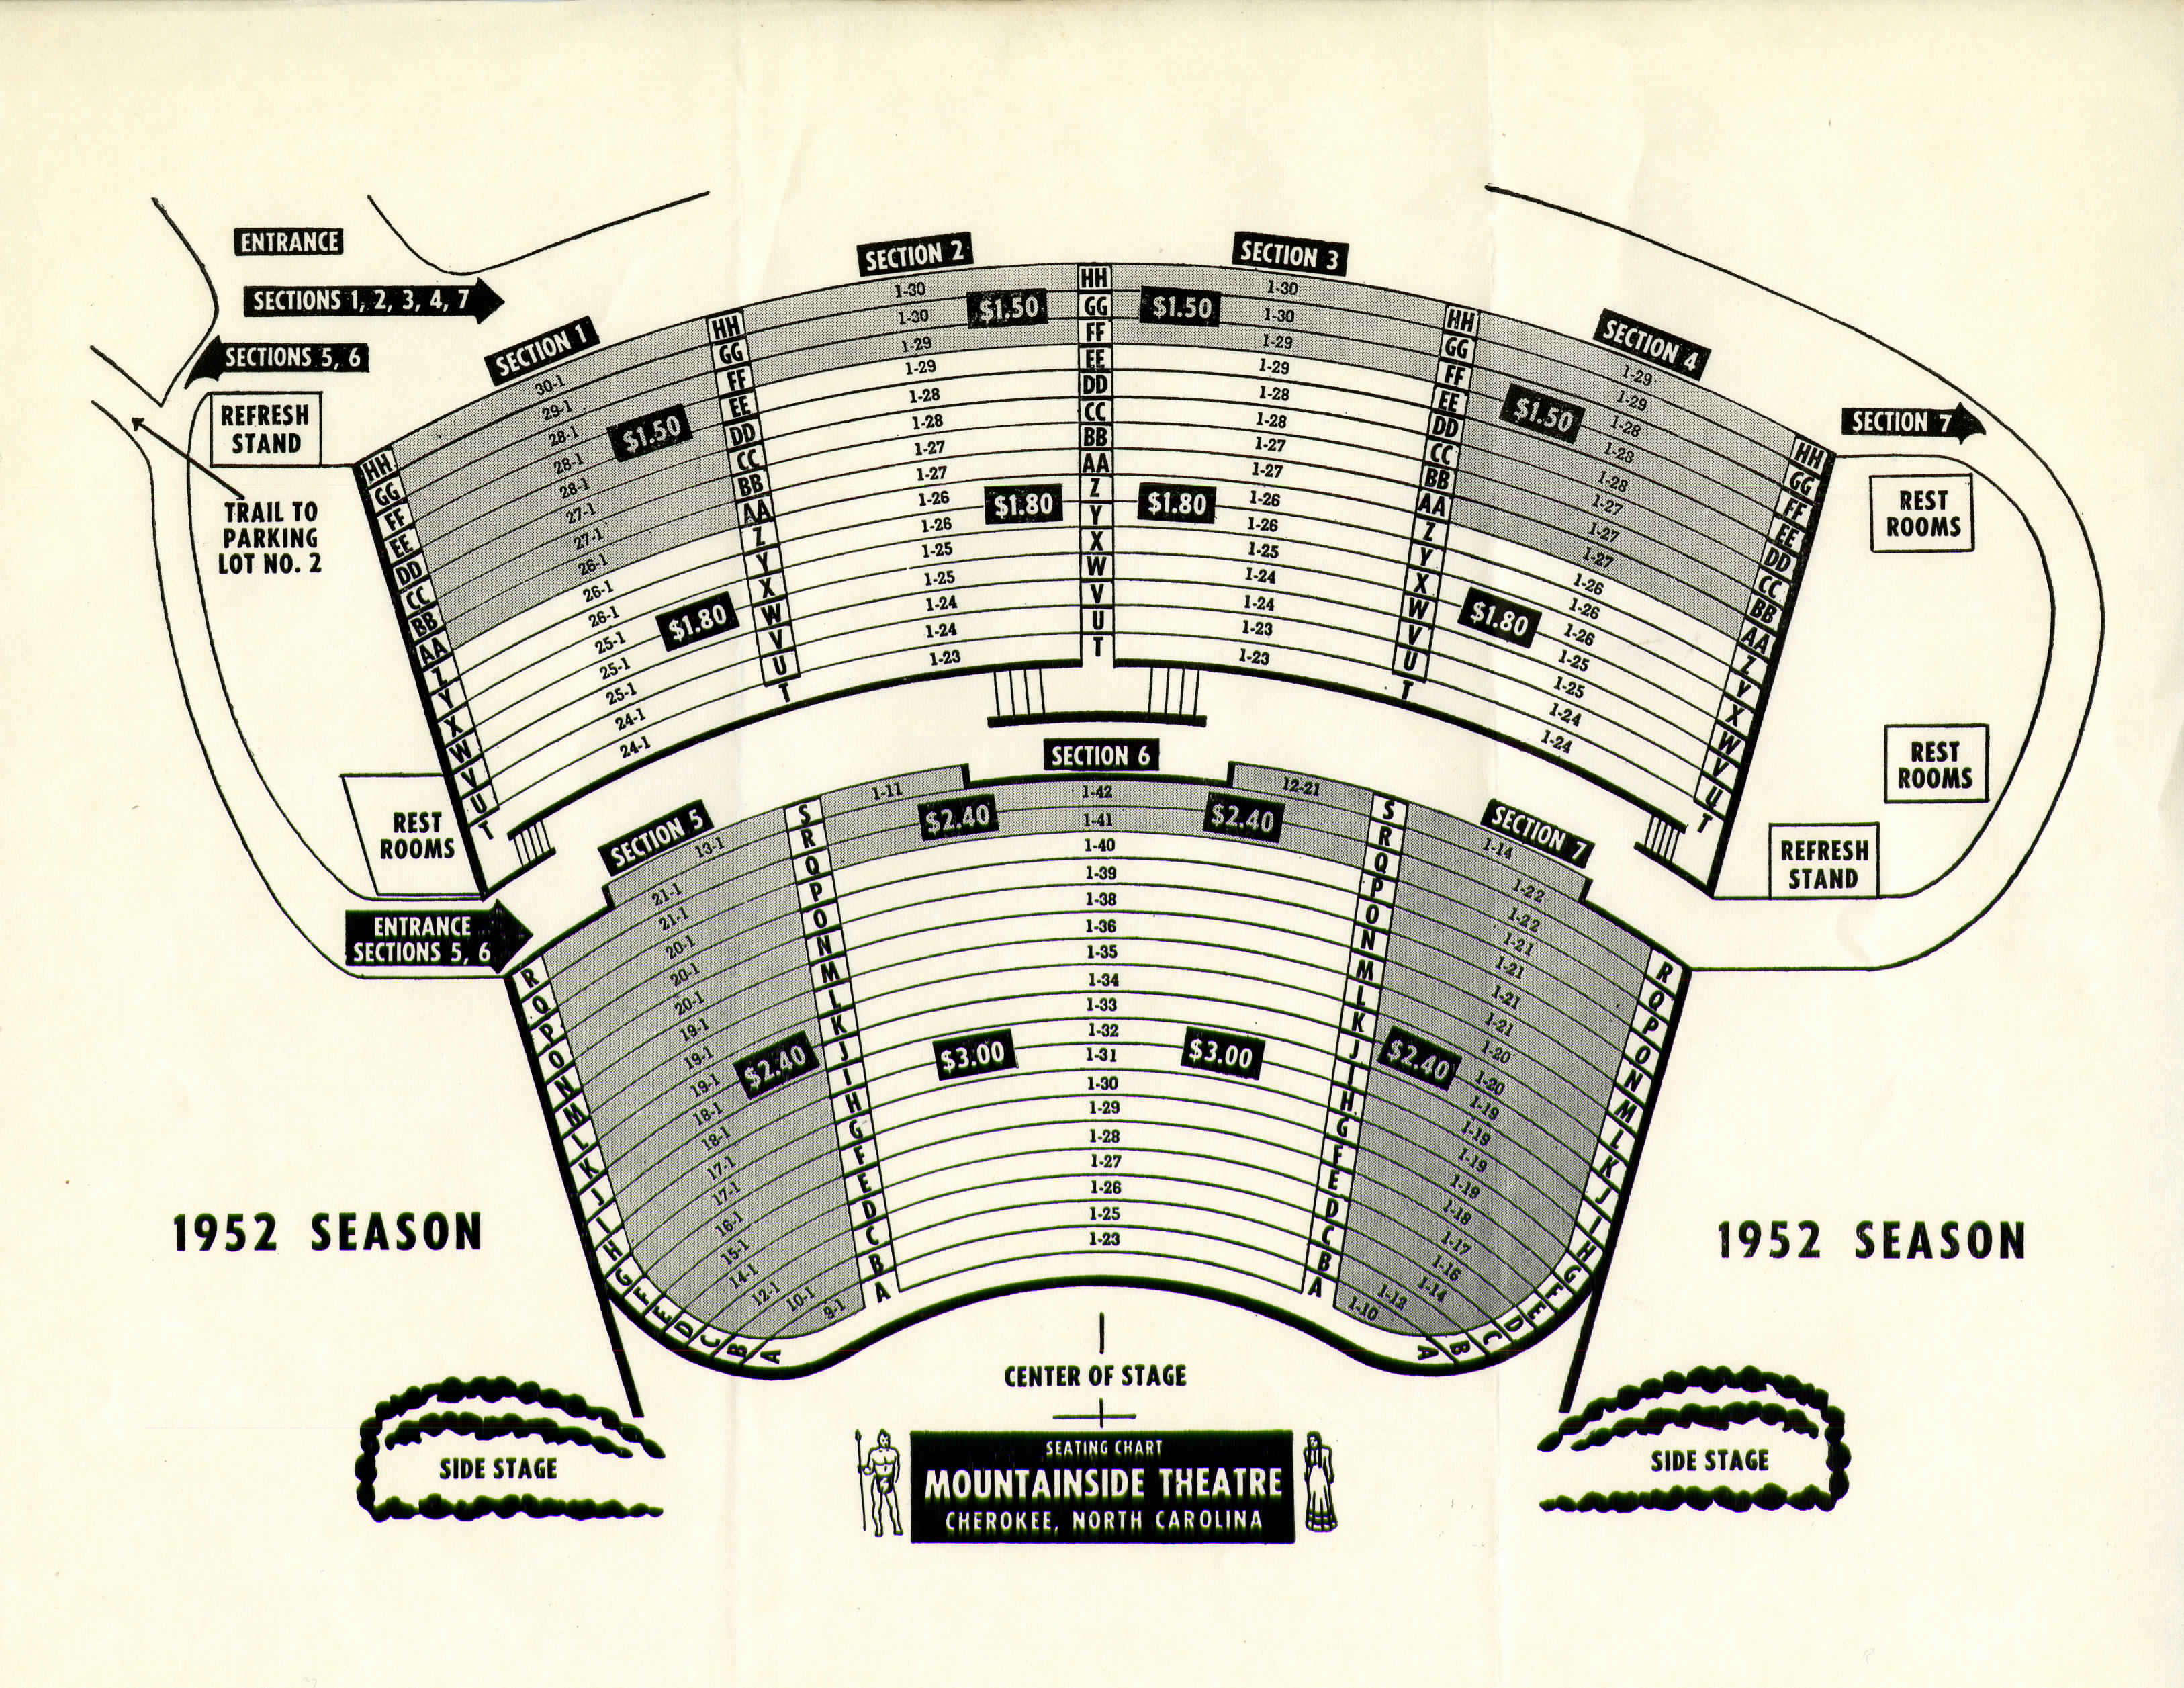 Illustration of Mountainside Theatre seating areas and pricing for "Unto These Hills" outdoor drama.